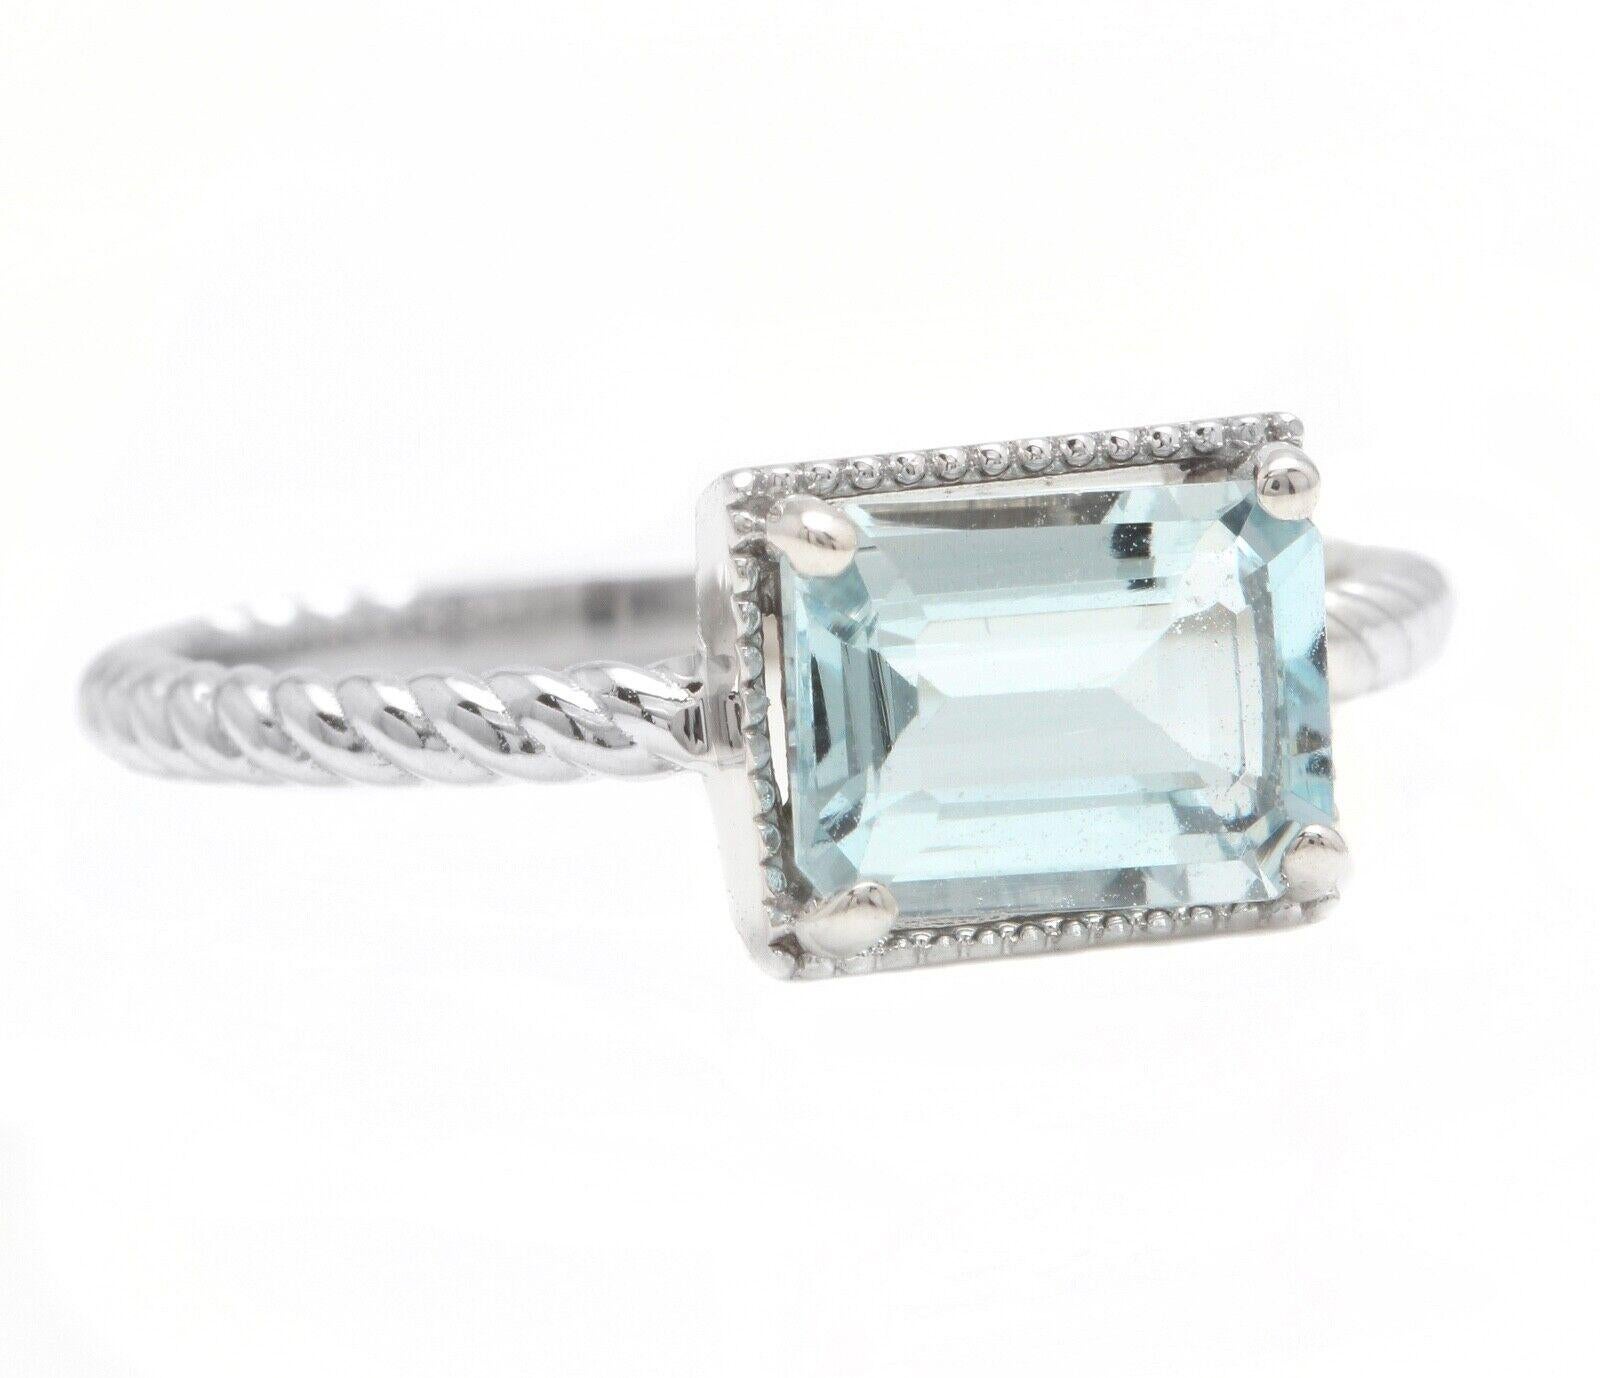 1.25 Carat Exquisite Natural Aquamarine 14K Solid White Gold Ring

Total Natural Aquamarine Weight is: Approx. 1.25 Carats 

Aquamarine Measures: Approx. 8.00 x 6.00 mm

Aquamarine Treatment: Heating

Ring size: 7 (free re-sizing available)

Ring